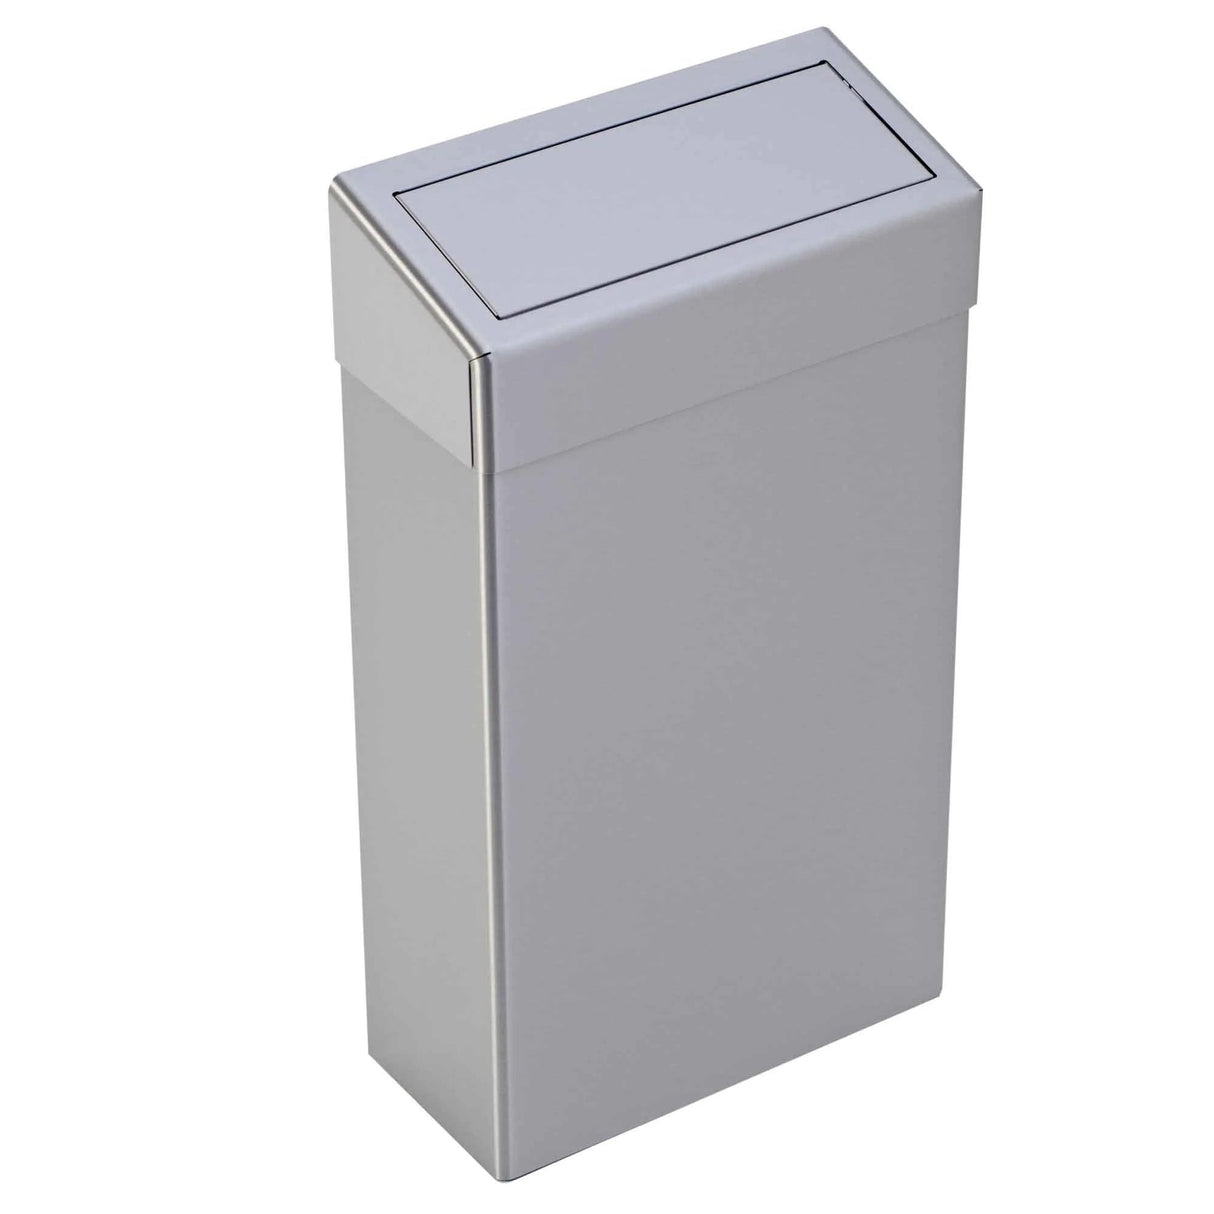 BC130 Dolphin 30LTR 304 Stainless Steel Waste Bin With Lid